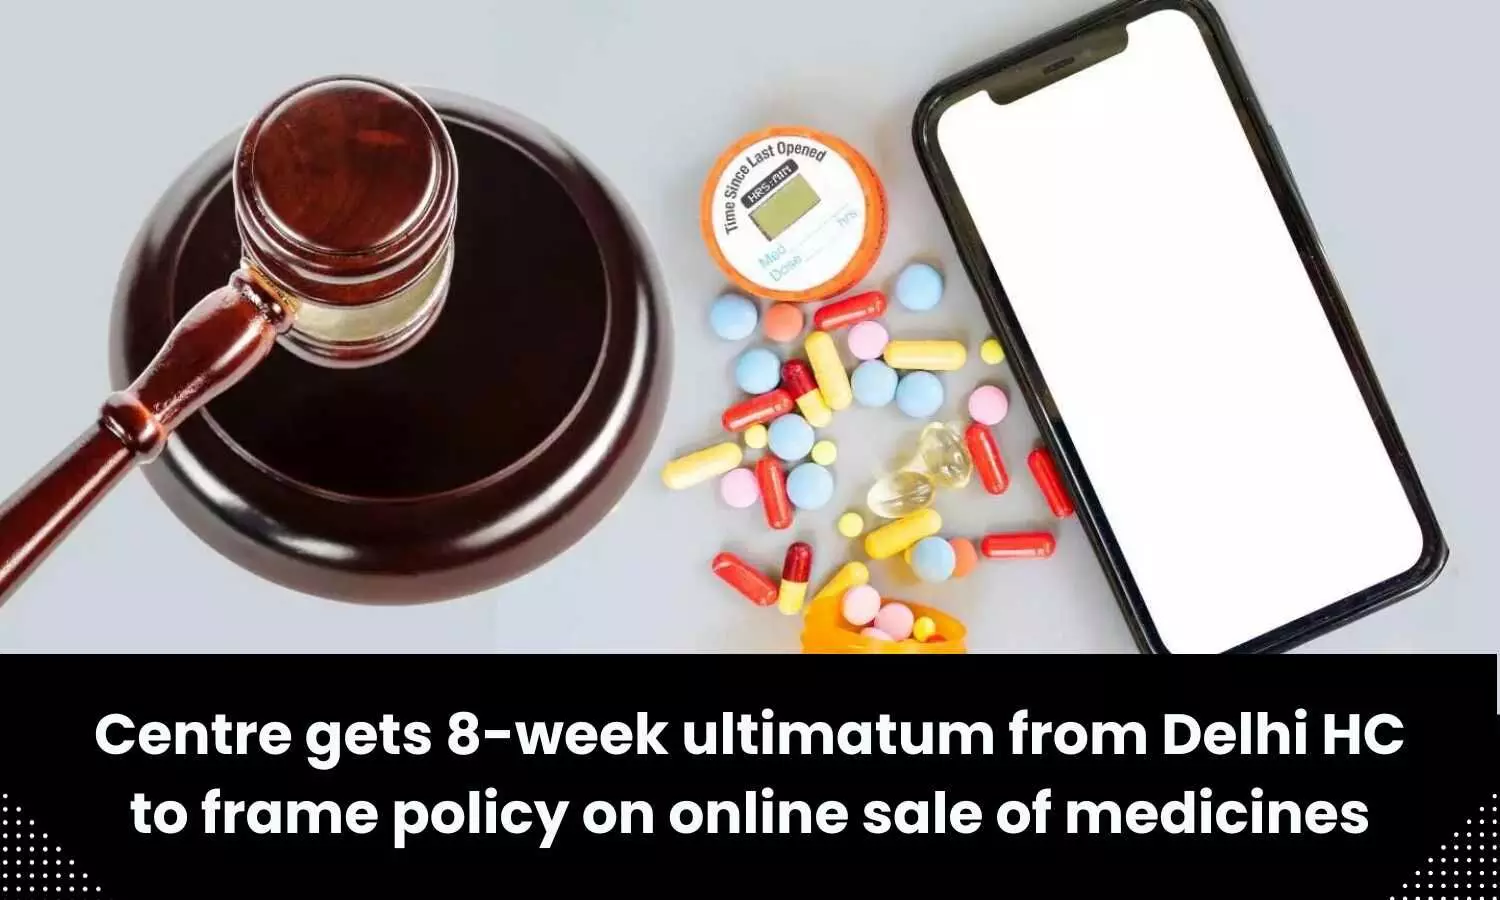 Frame policy on online sale of medicines within eight weeks: Delhi HC to Centre